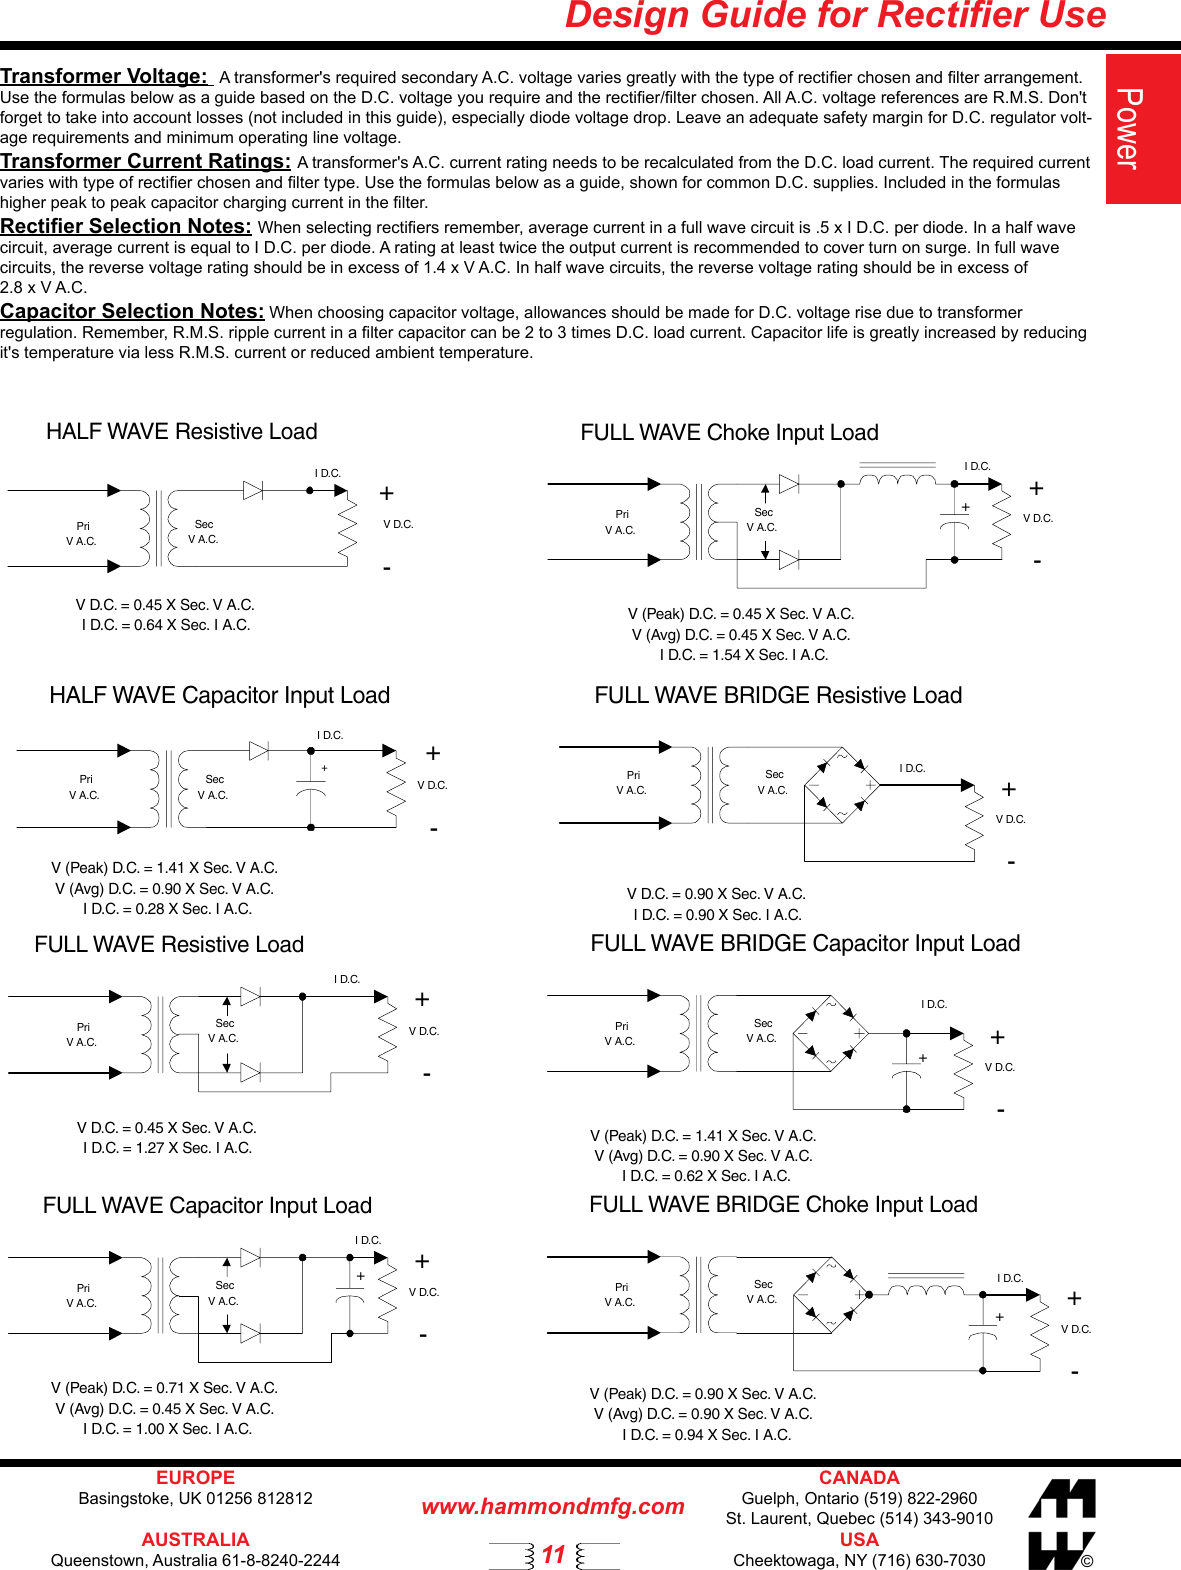 Page 1 of 1 - Hammond Rectifier Design Guide